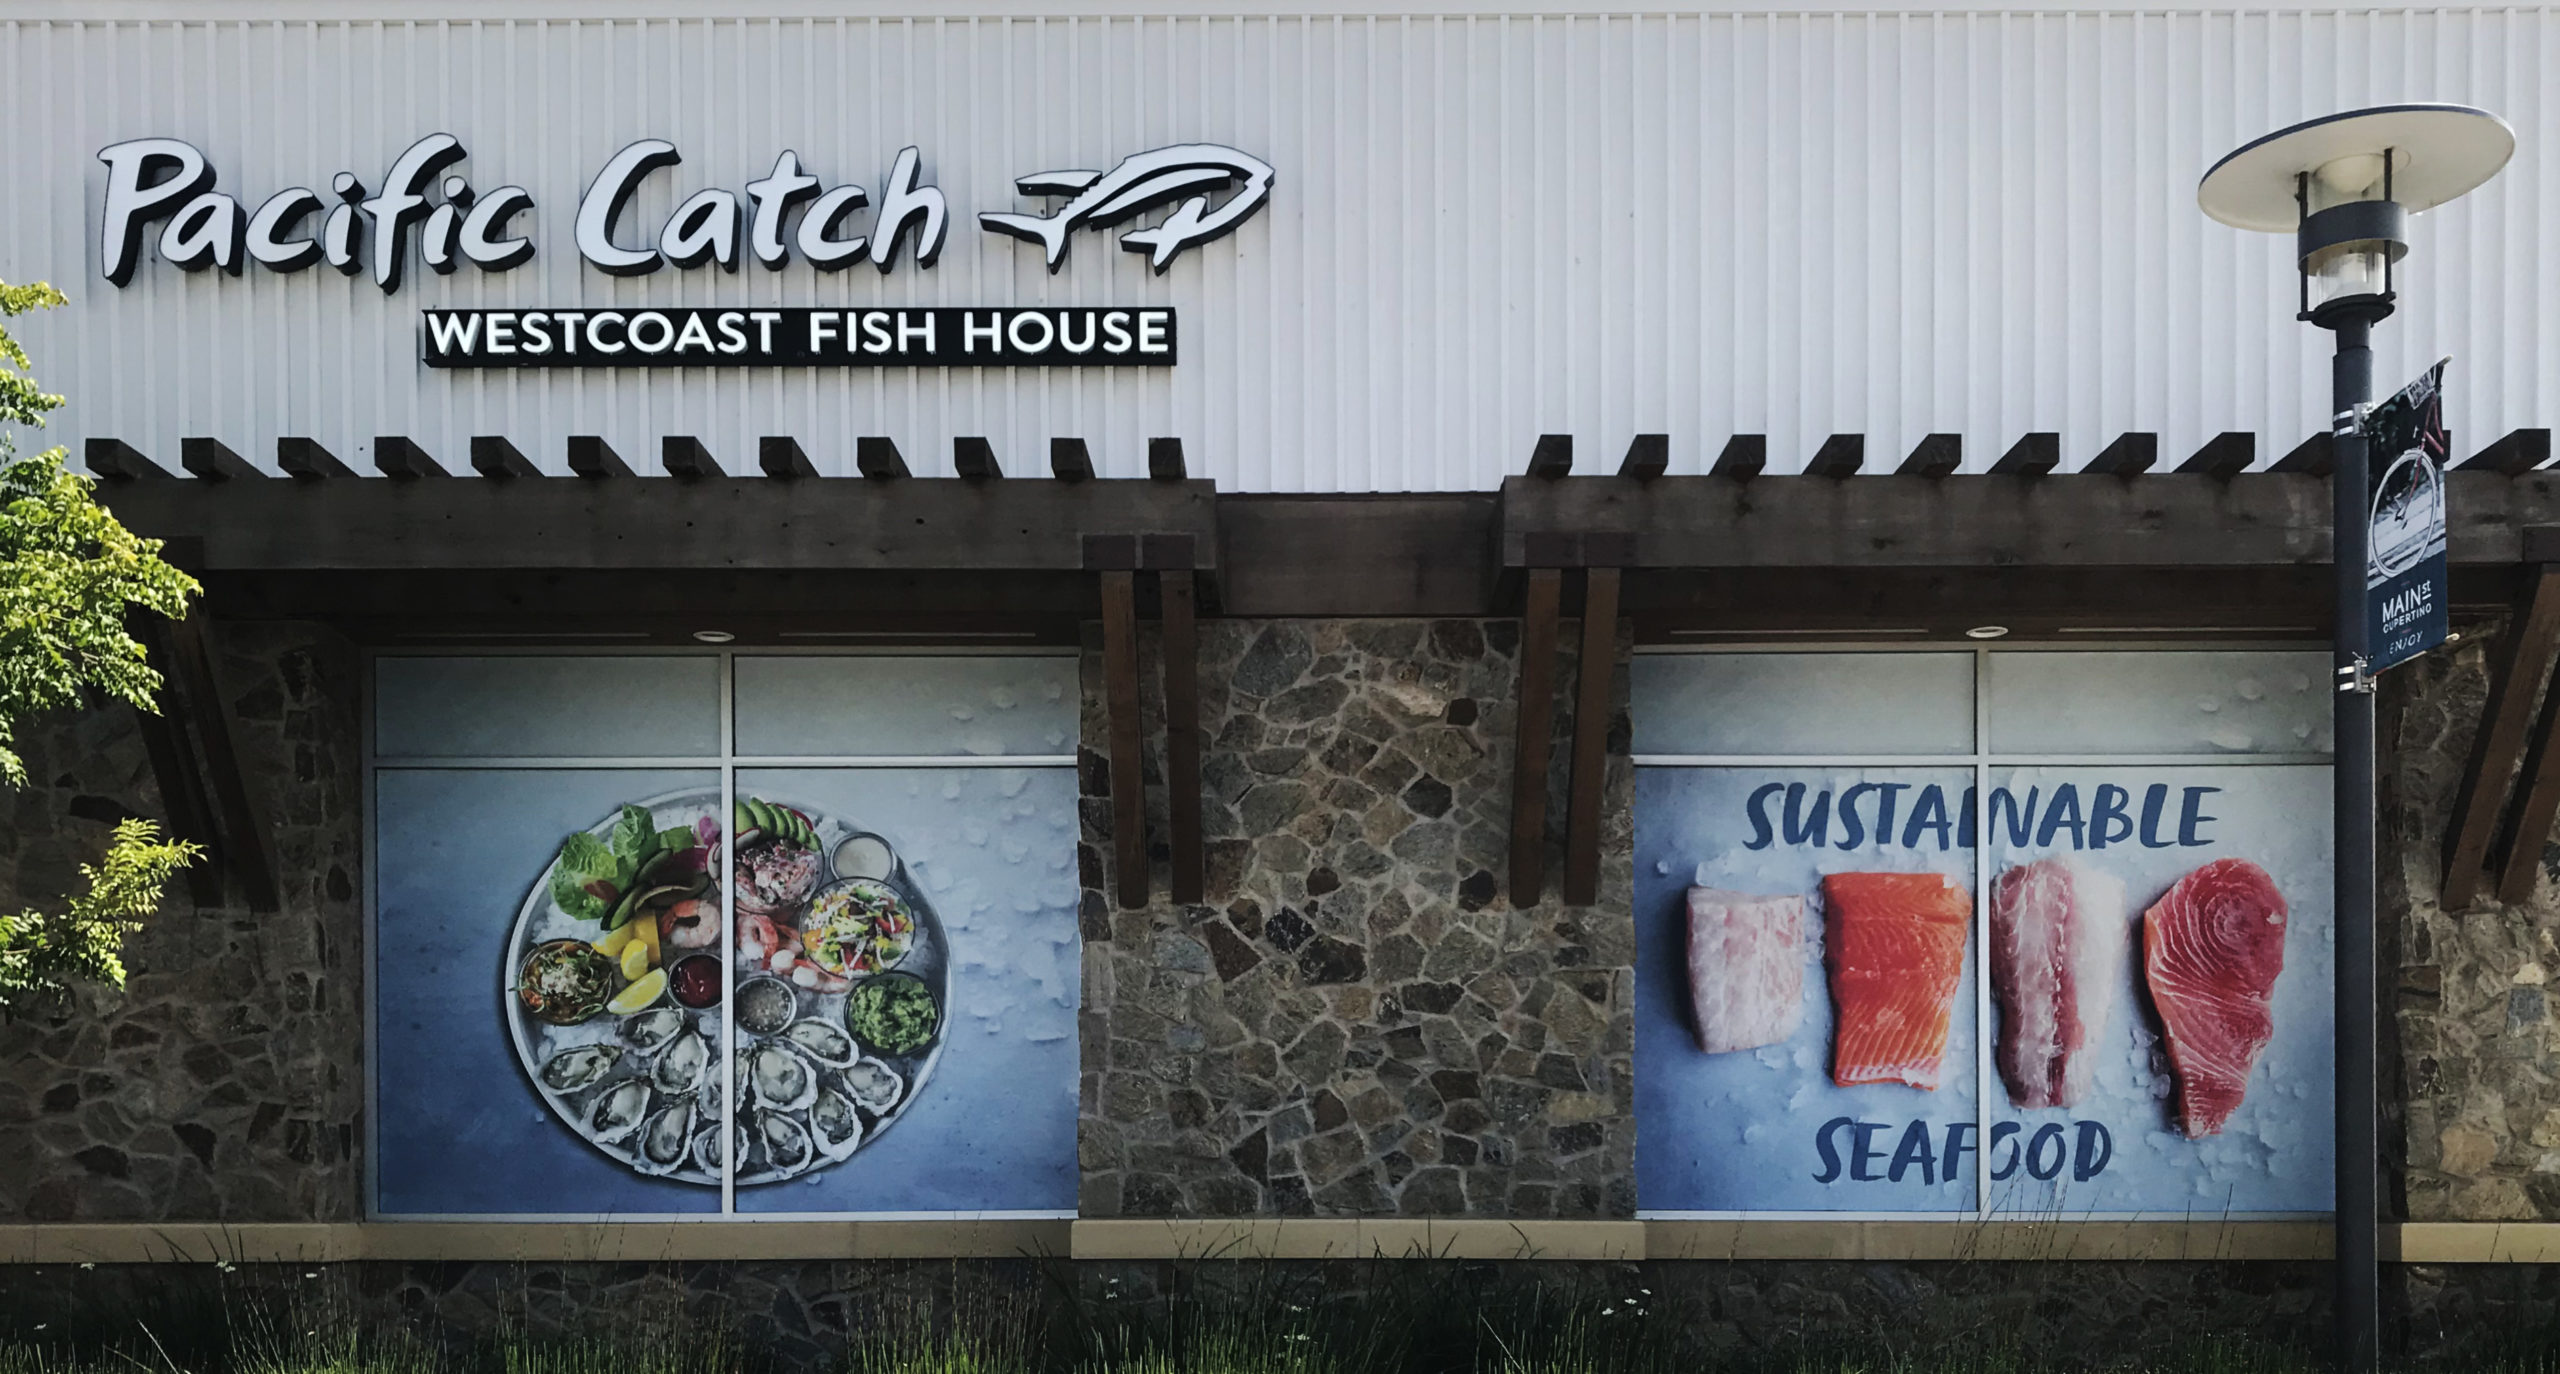 Pacific Catch west Coast Fish House windows wrapped with seafood pictures